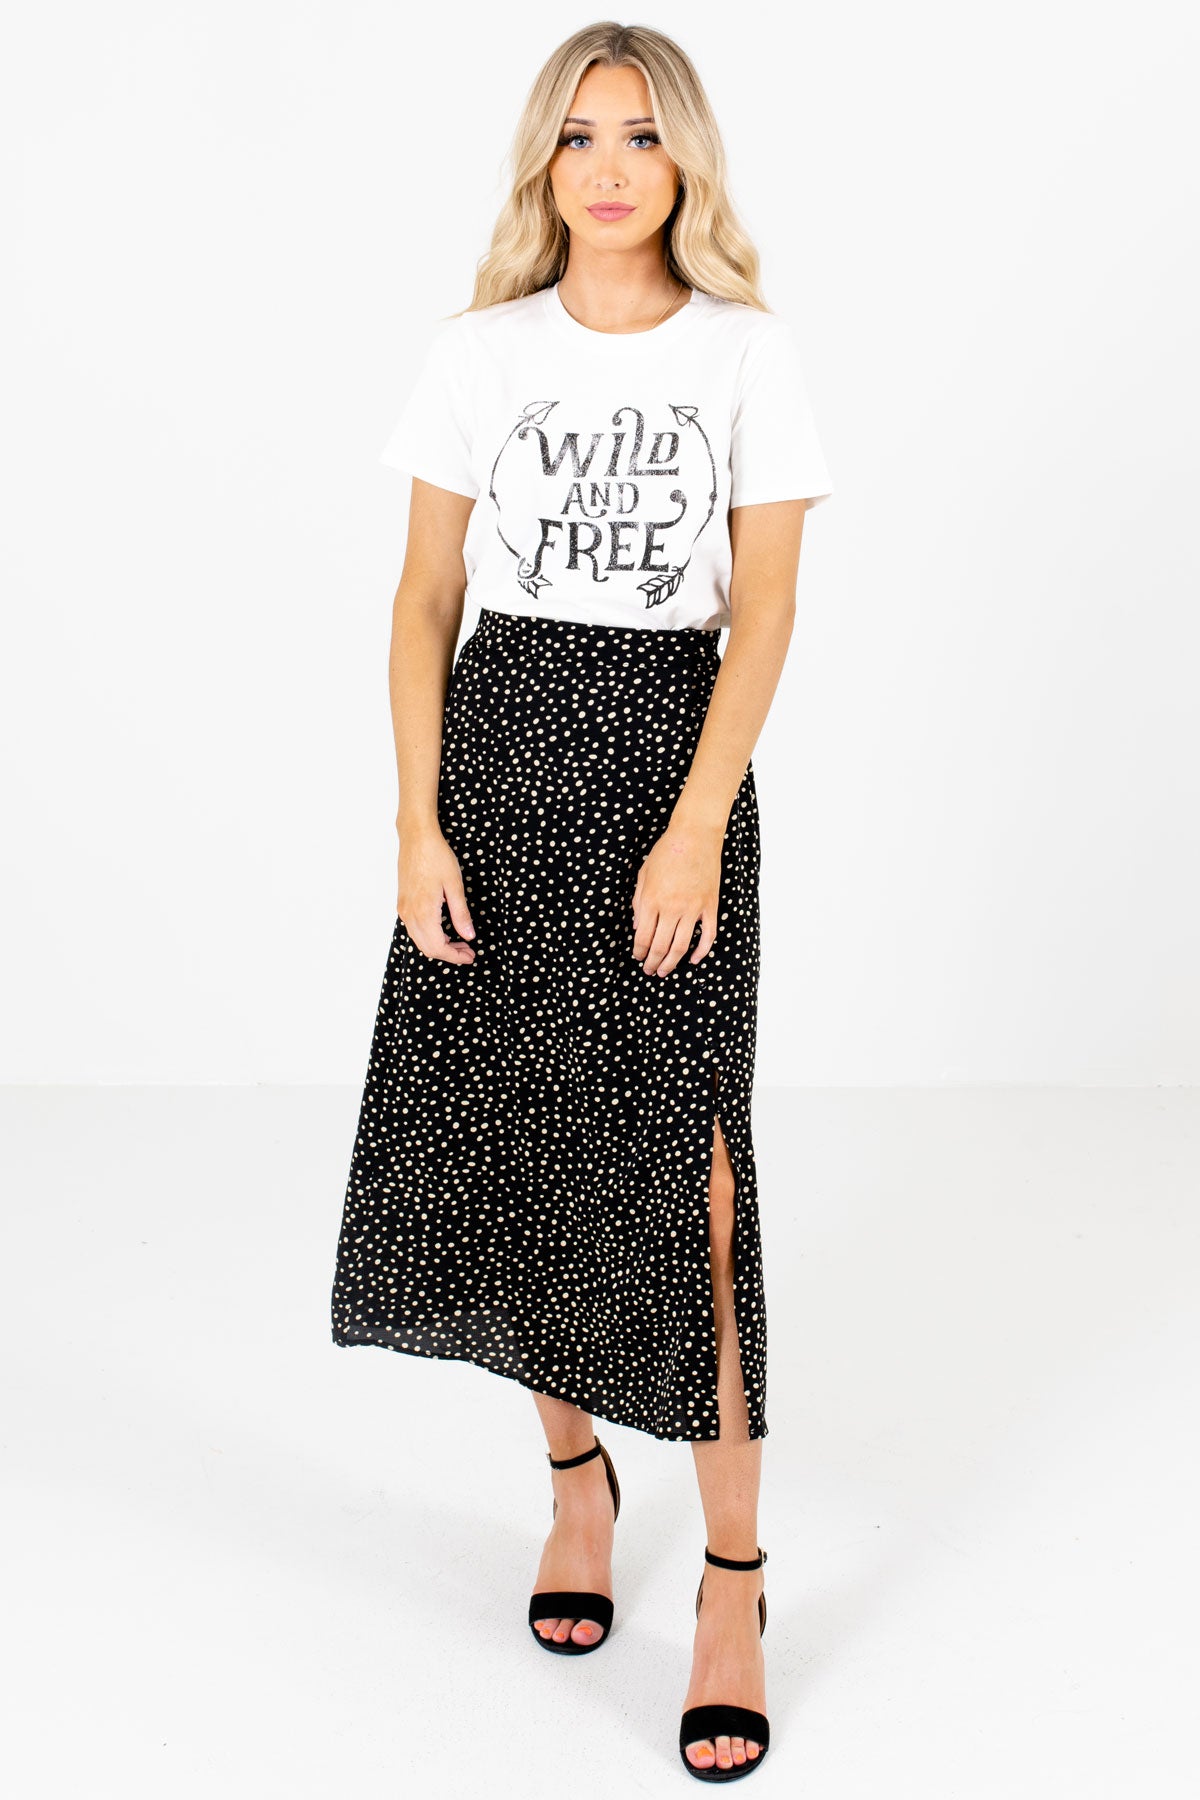 Crazy About You Black Midi Skirt | Boutique Skirts for Women